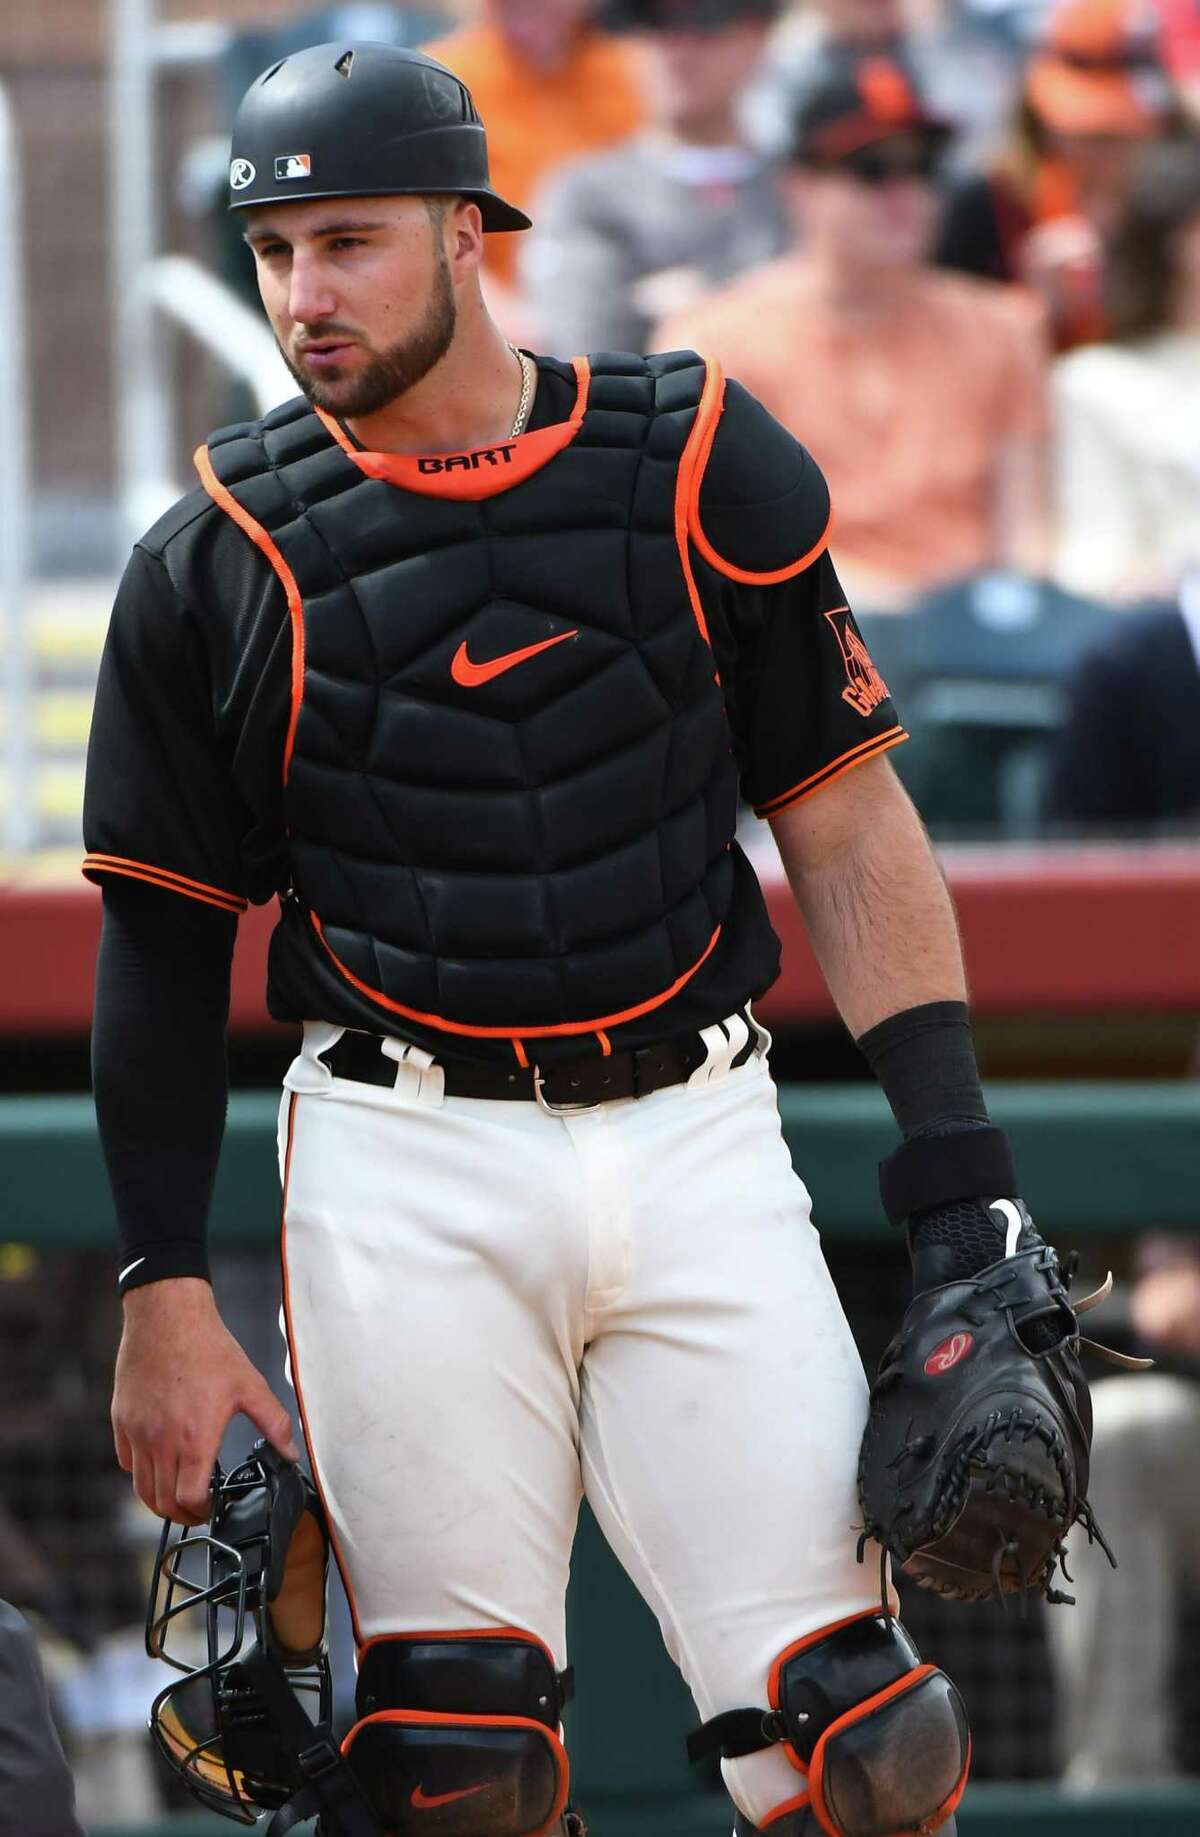 Joey Bart of the San Francisco Giants during a game vs the San Diego Padres on Tuesday March 29, 2022 at Scottsdale Stadium in Scottsdale, AZ.